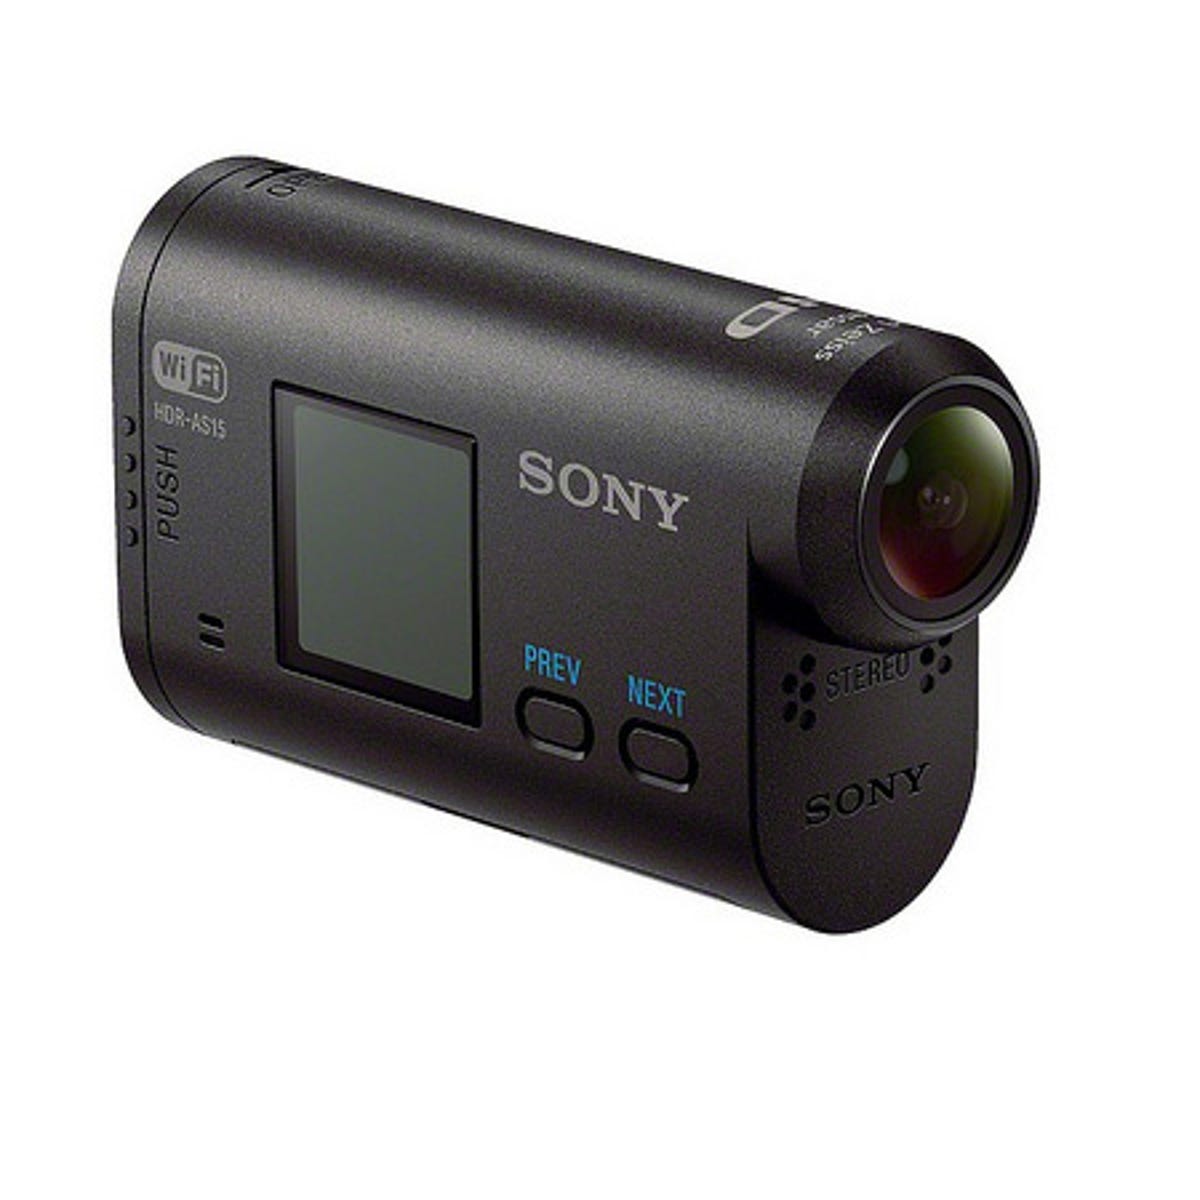 Sony Action Cam HDR-AS15 review: Sony Action Cam HDR-AS15 - CNET